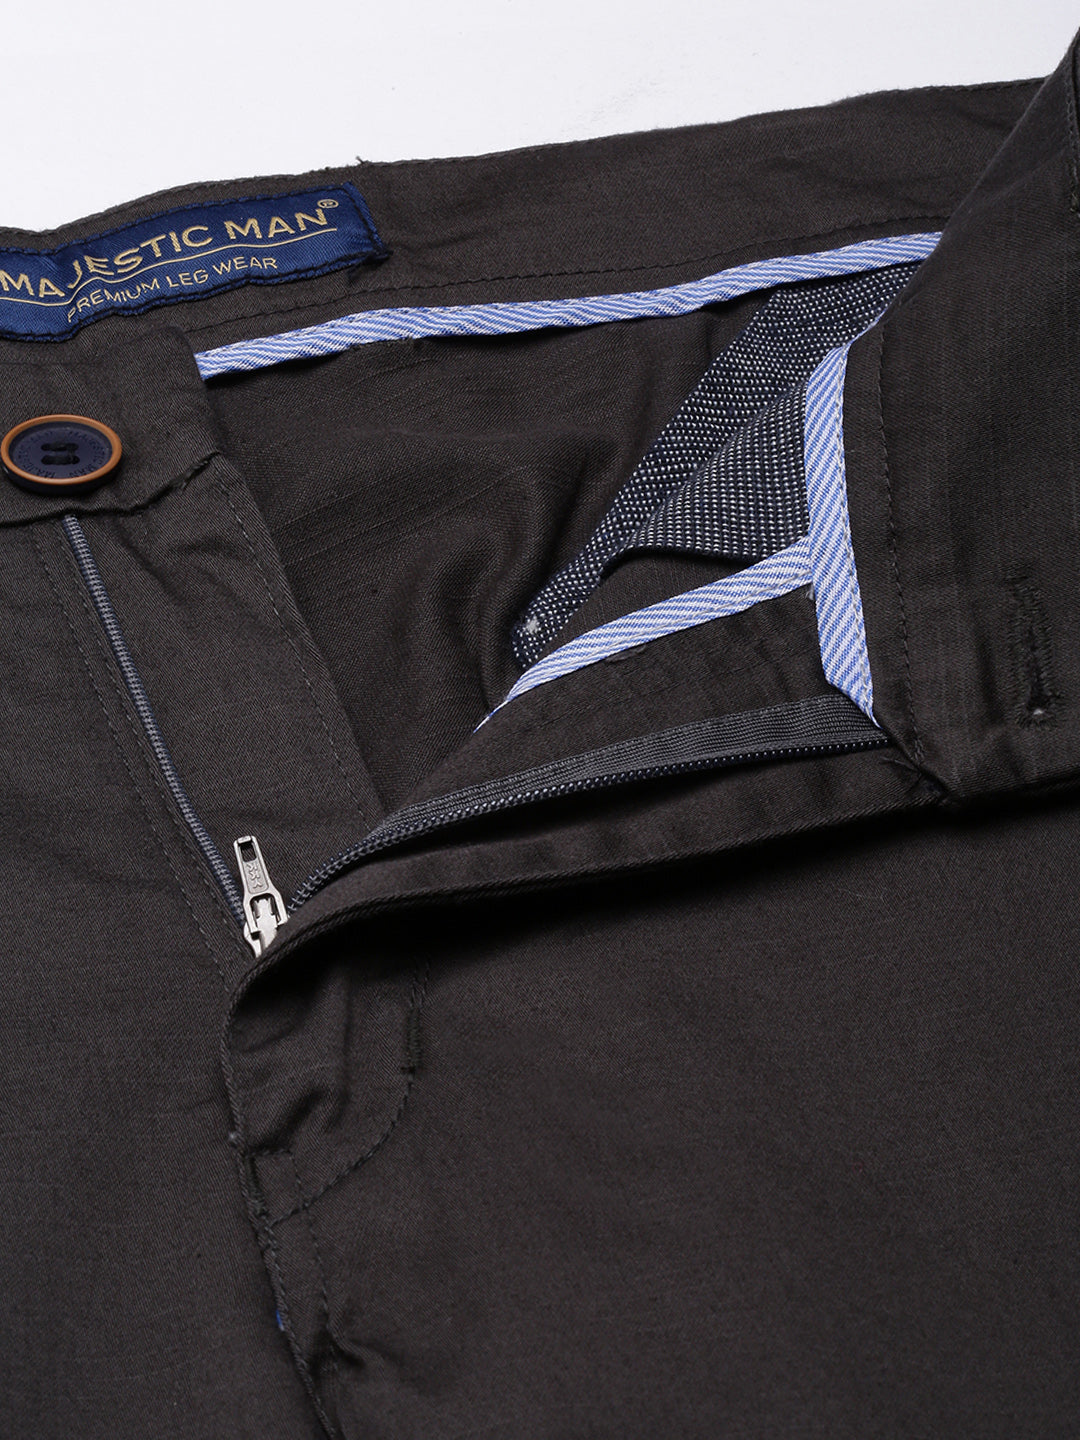 Classic Men's Trousers for Effortless Style - Jet Grey